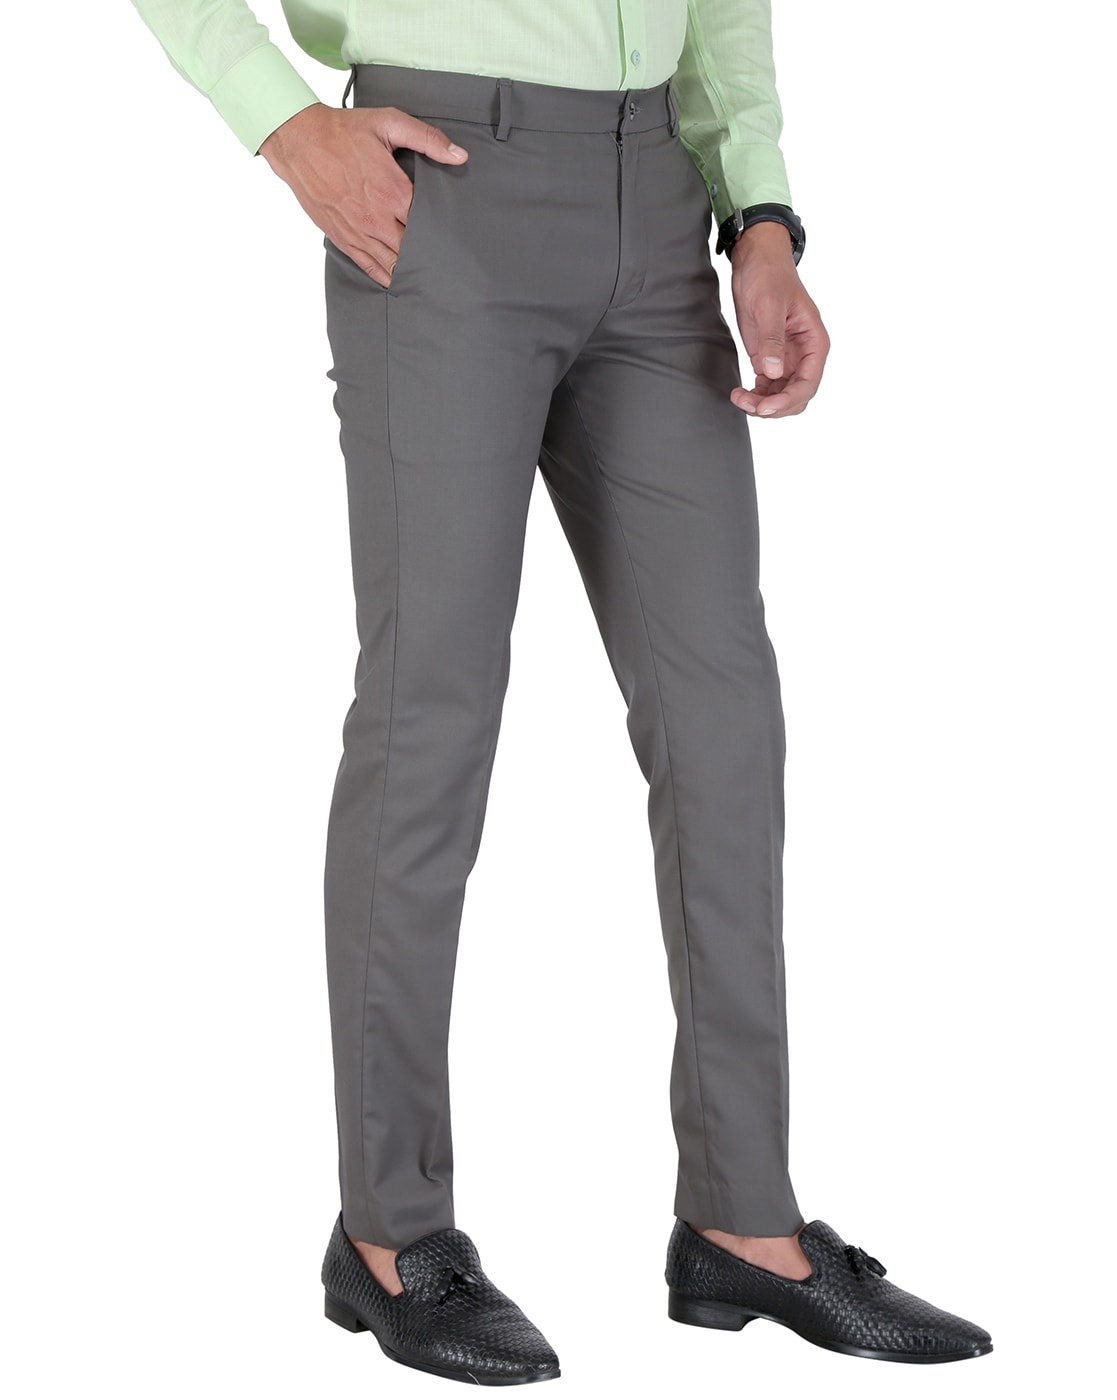 Washable Comfortable Black Plain Polycotton Formal Pant 32 Inch Waist Size  For Mens at Best Price in Delhi  F K Formal Trousers Maker